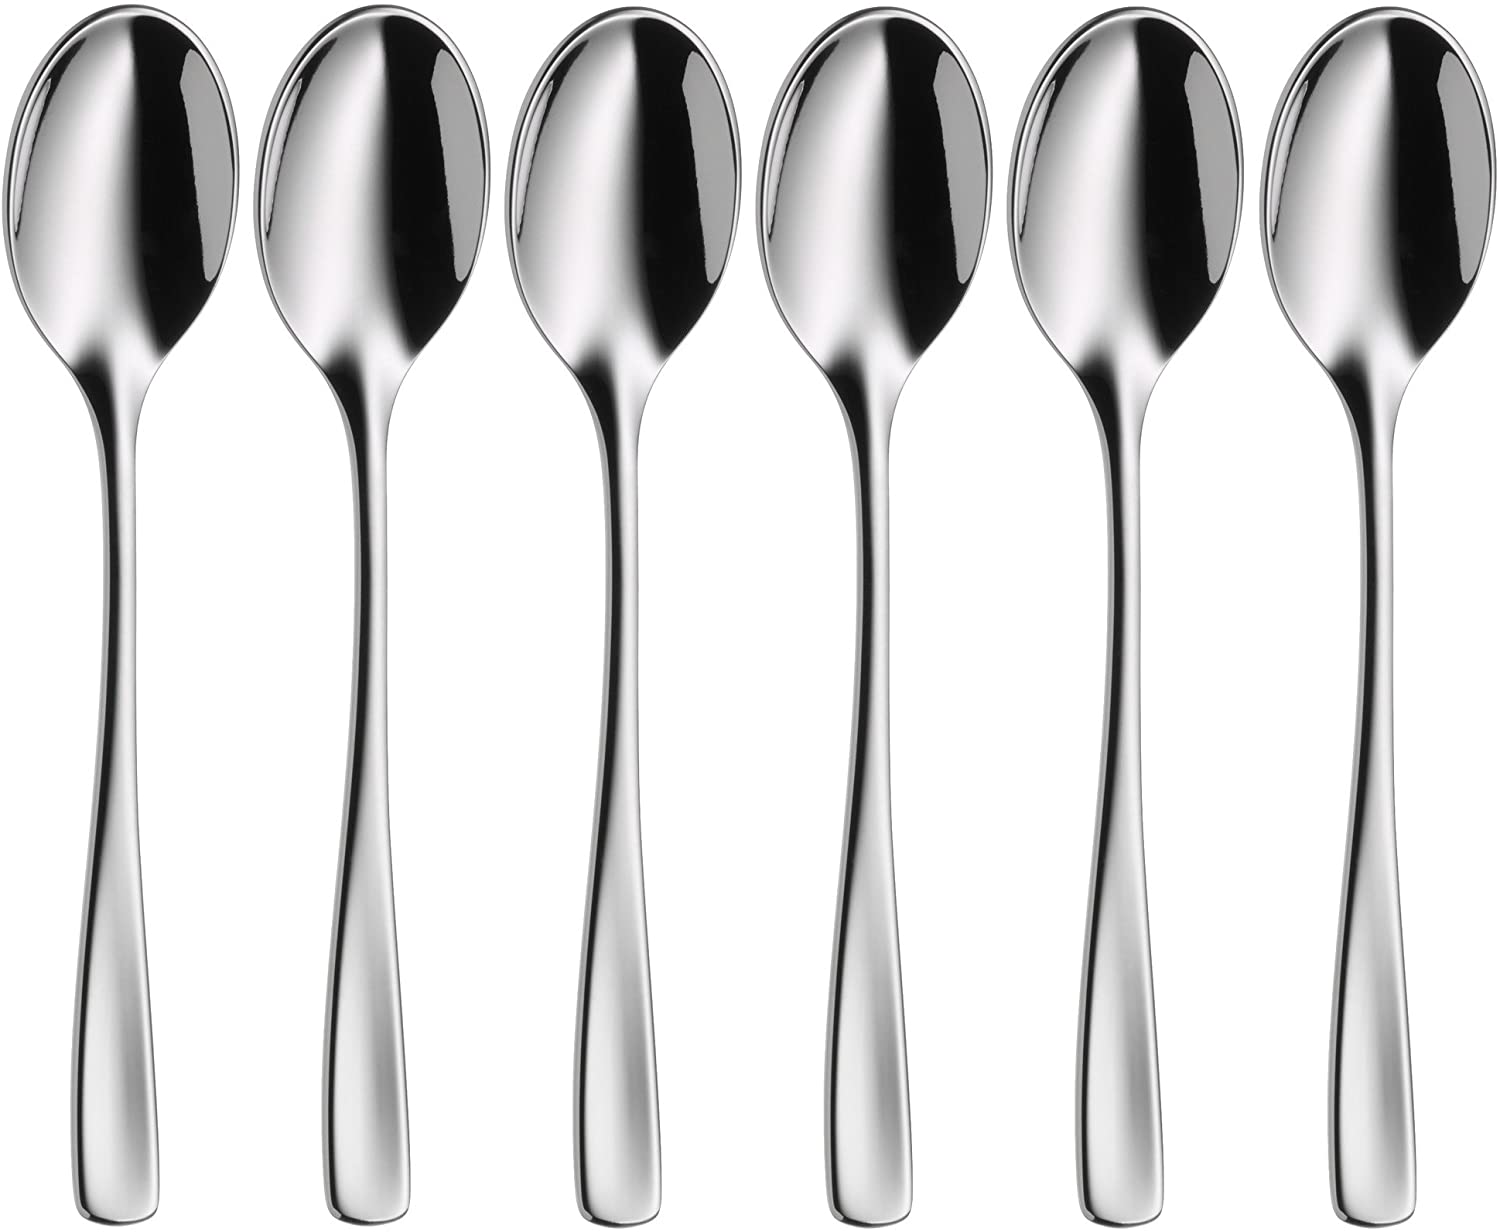 WMF Ambiente 1228966340 Espresso Spoons Cromargan Protect Stainless Steel Set of 6